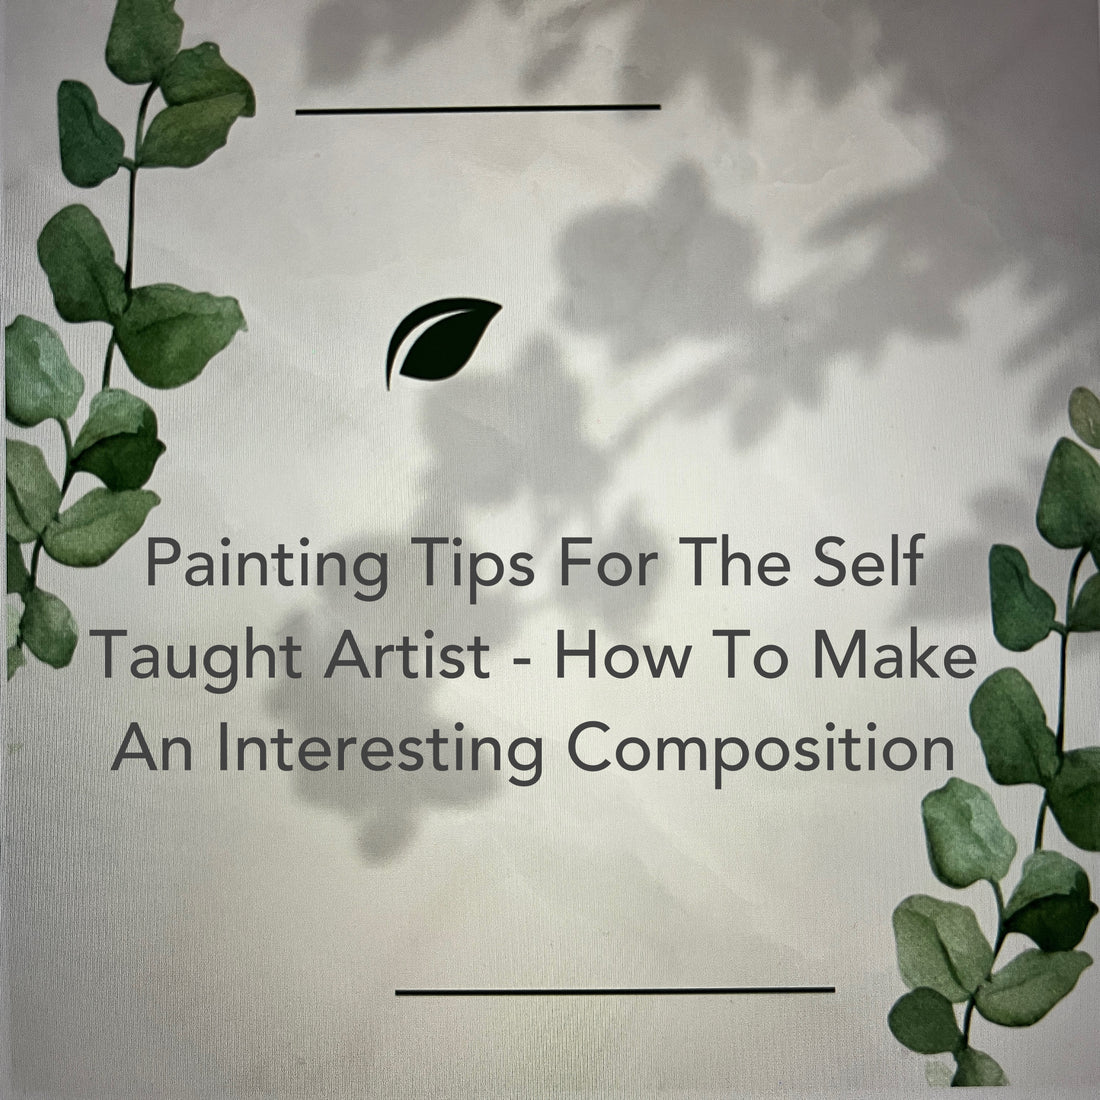 Painting tips for the self taught artist - How to make an interesting composition